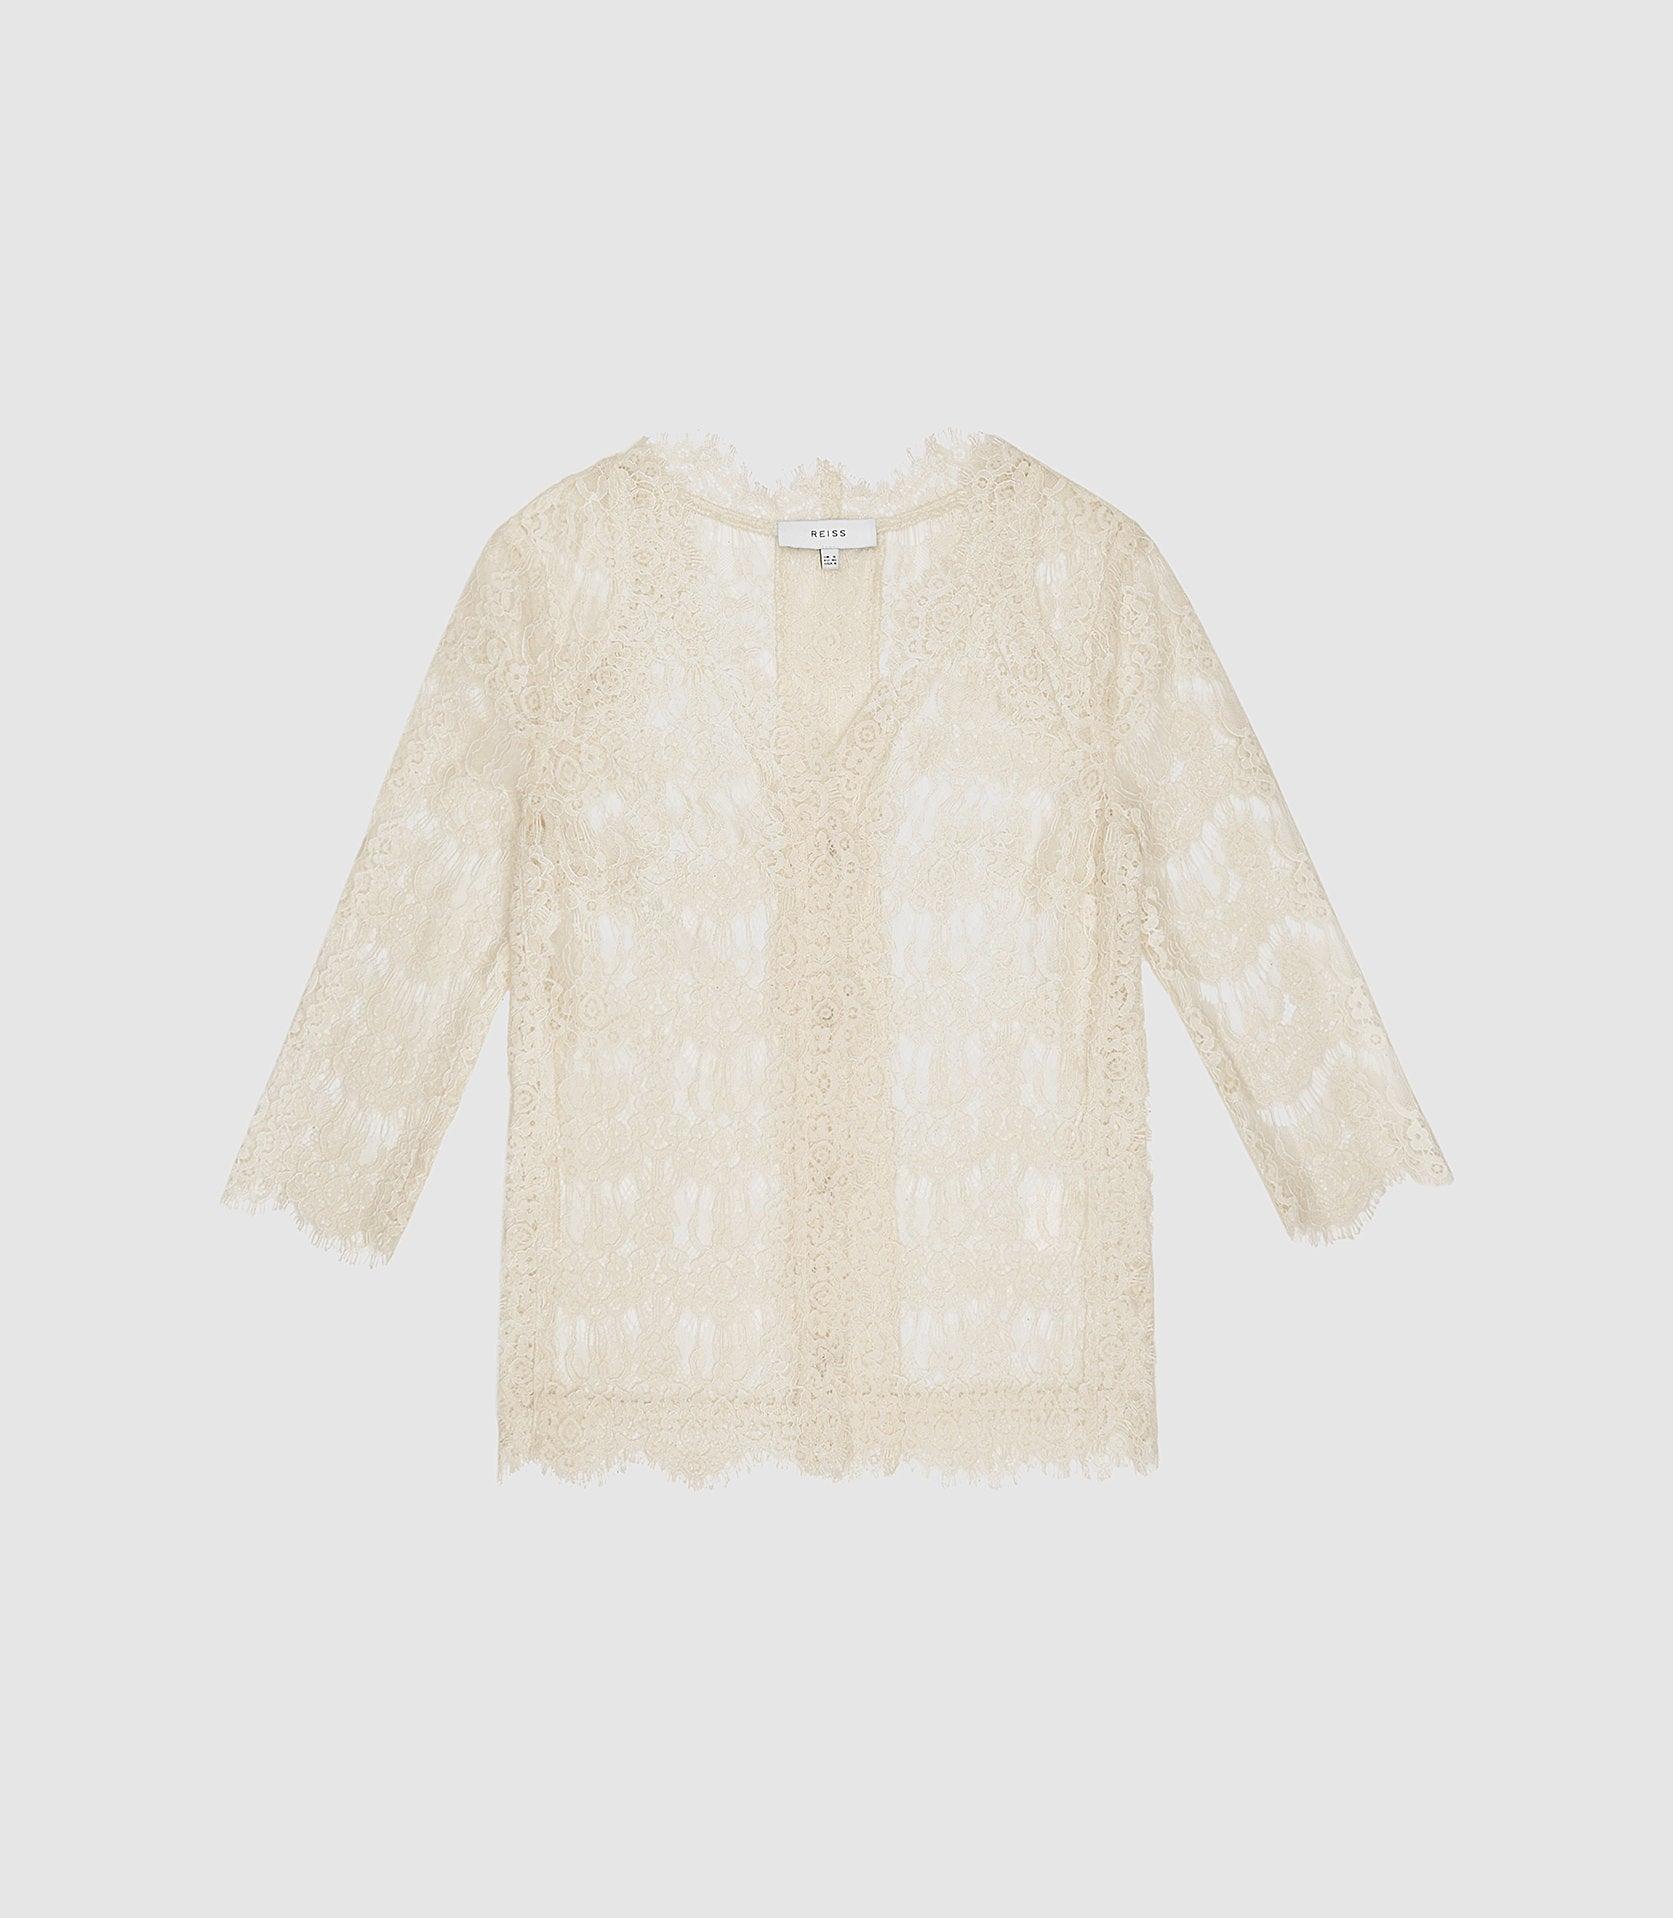 Reiss Lace Blouse in Cream (Natural) - Lyst